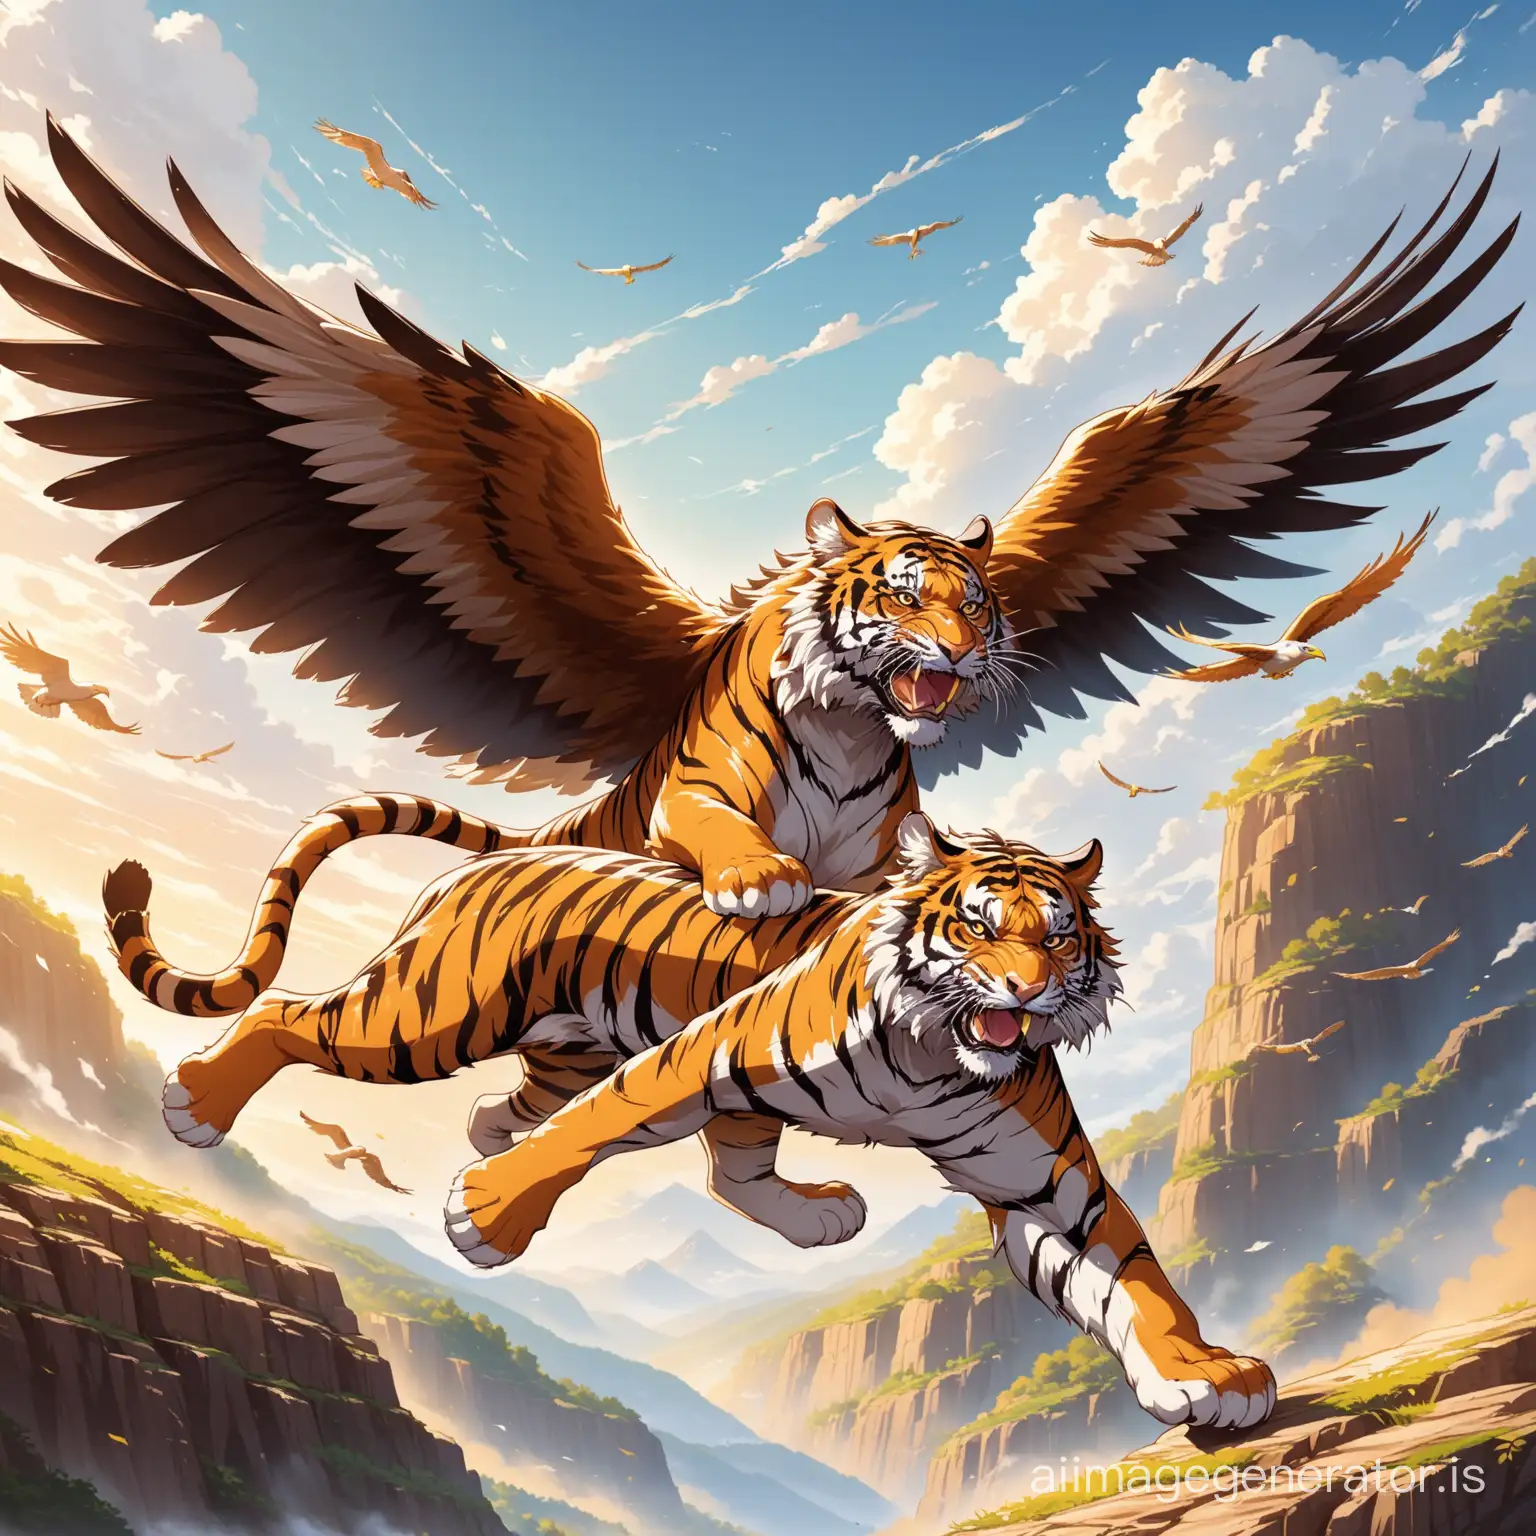 the tiger with eagle wing win the fight